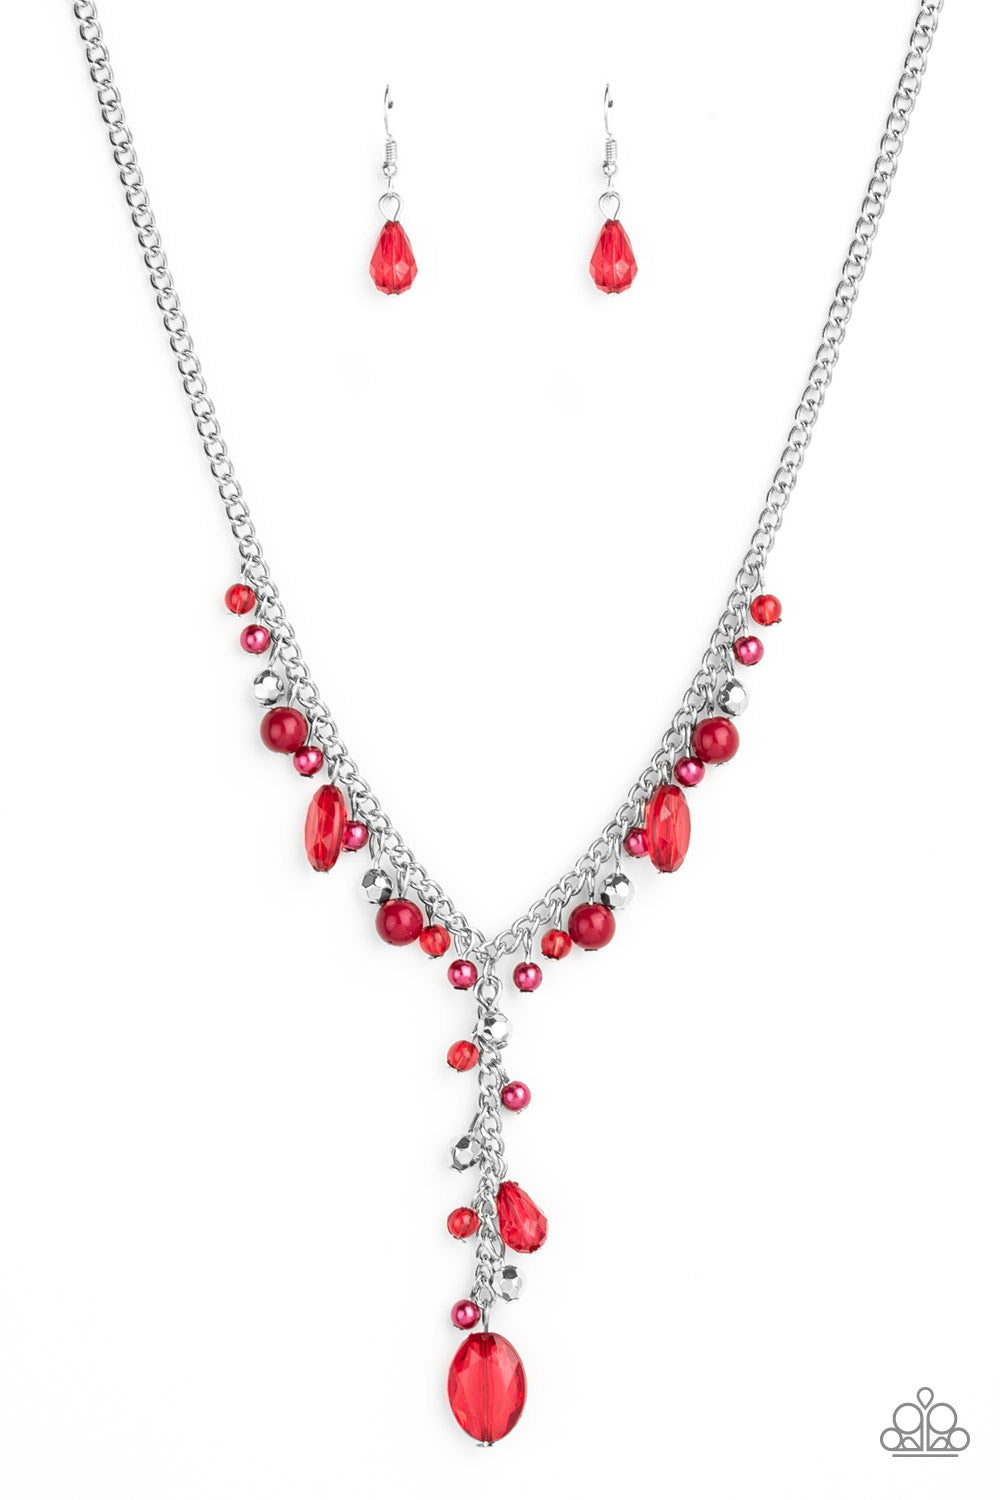 Crystal Couture - Red Necklace Set - Princess Glam Shop